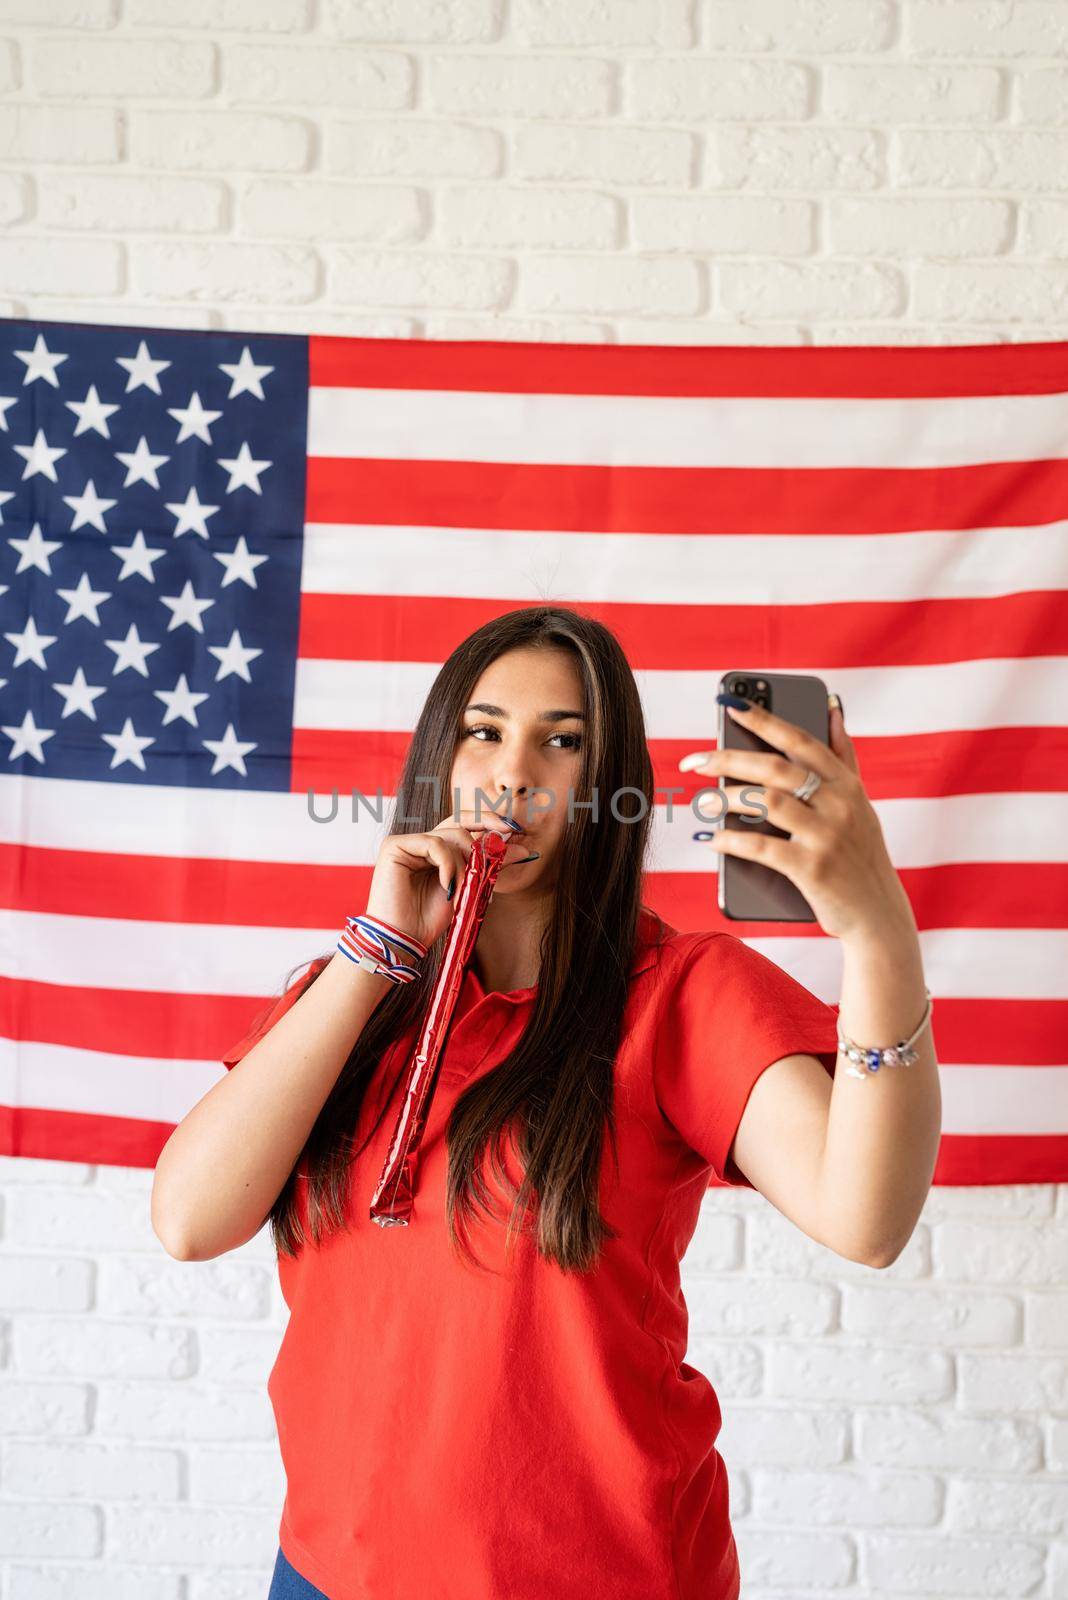 Independence day of the USA. Happy July 4th. Beautiful woman with a noisemaker taking a selfie on the USA flag background